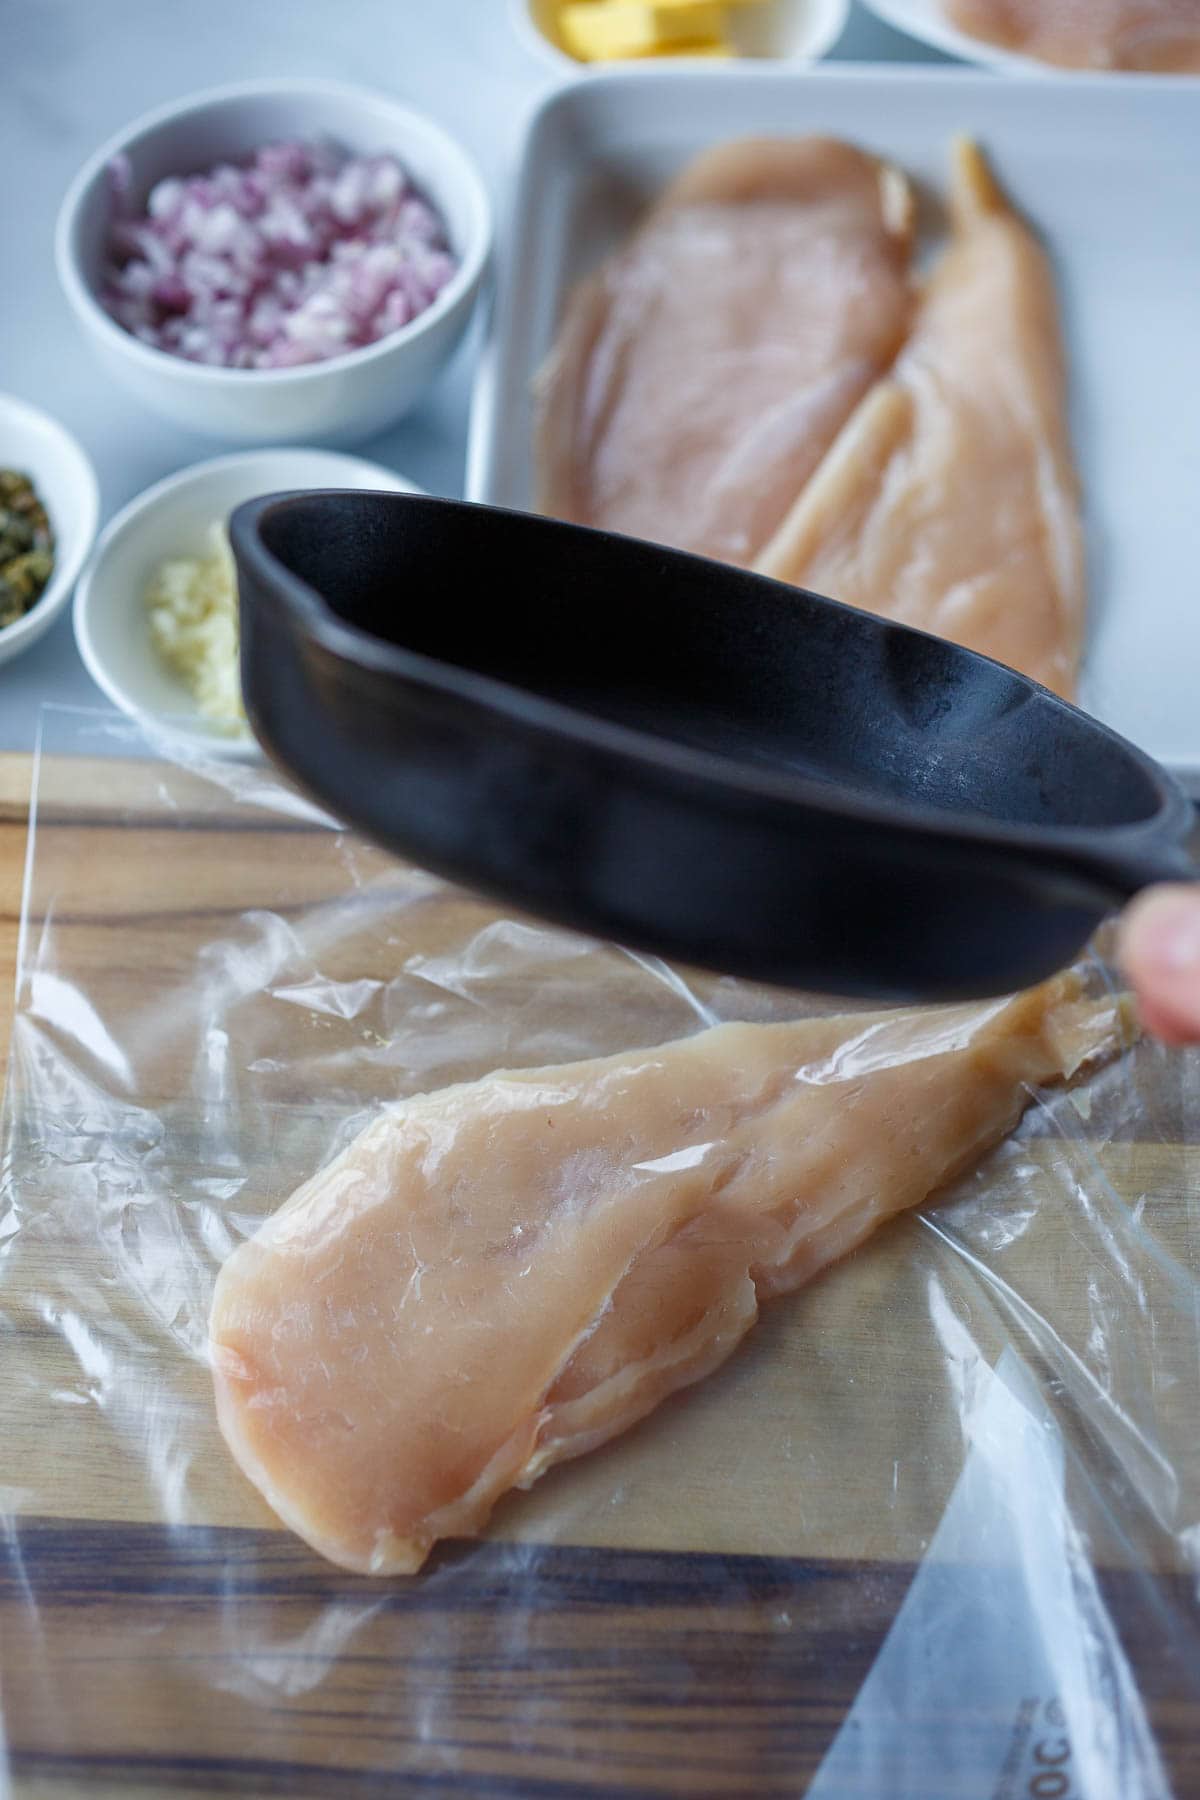 Pounding the chicken on a wooden cutting board, covered in plastic, with a small cast iron skillet.